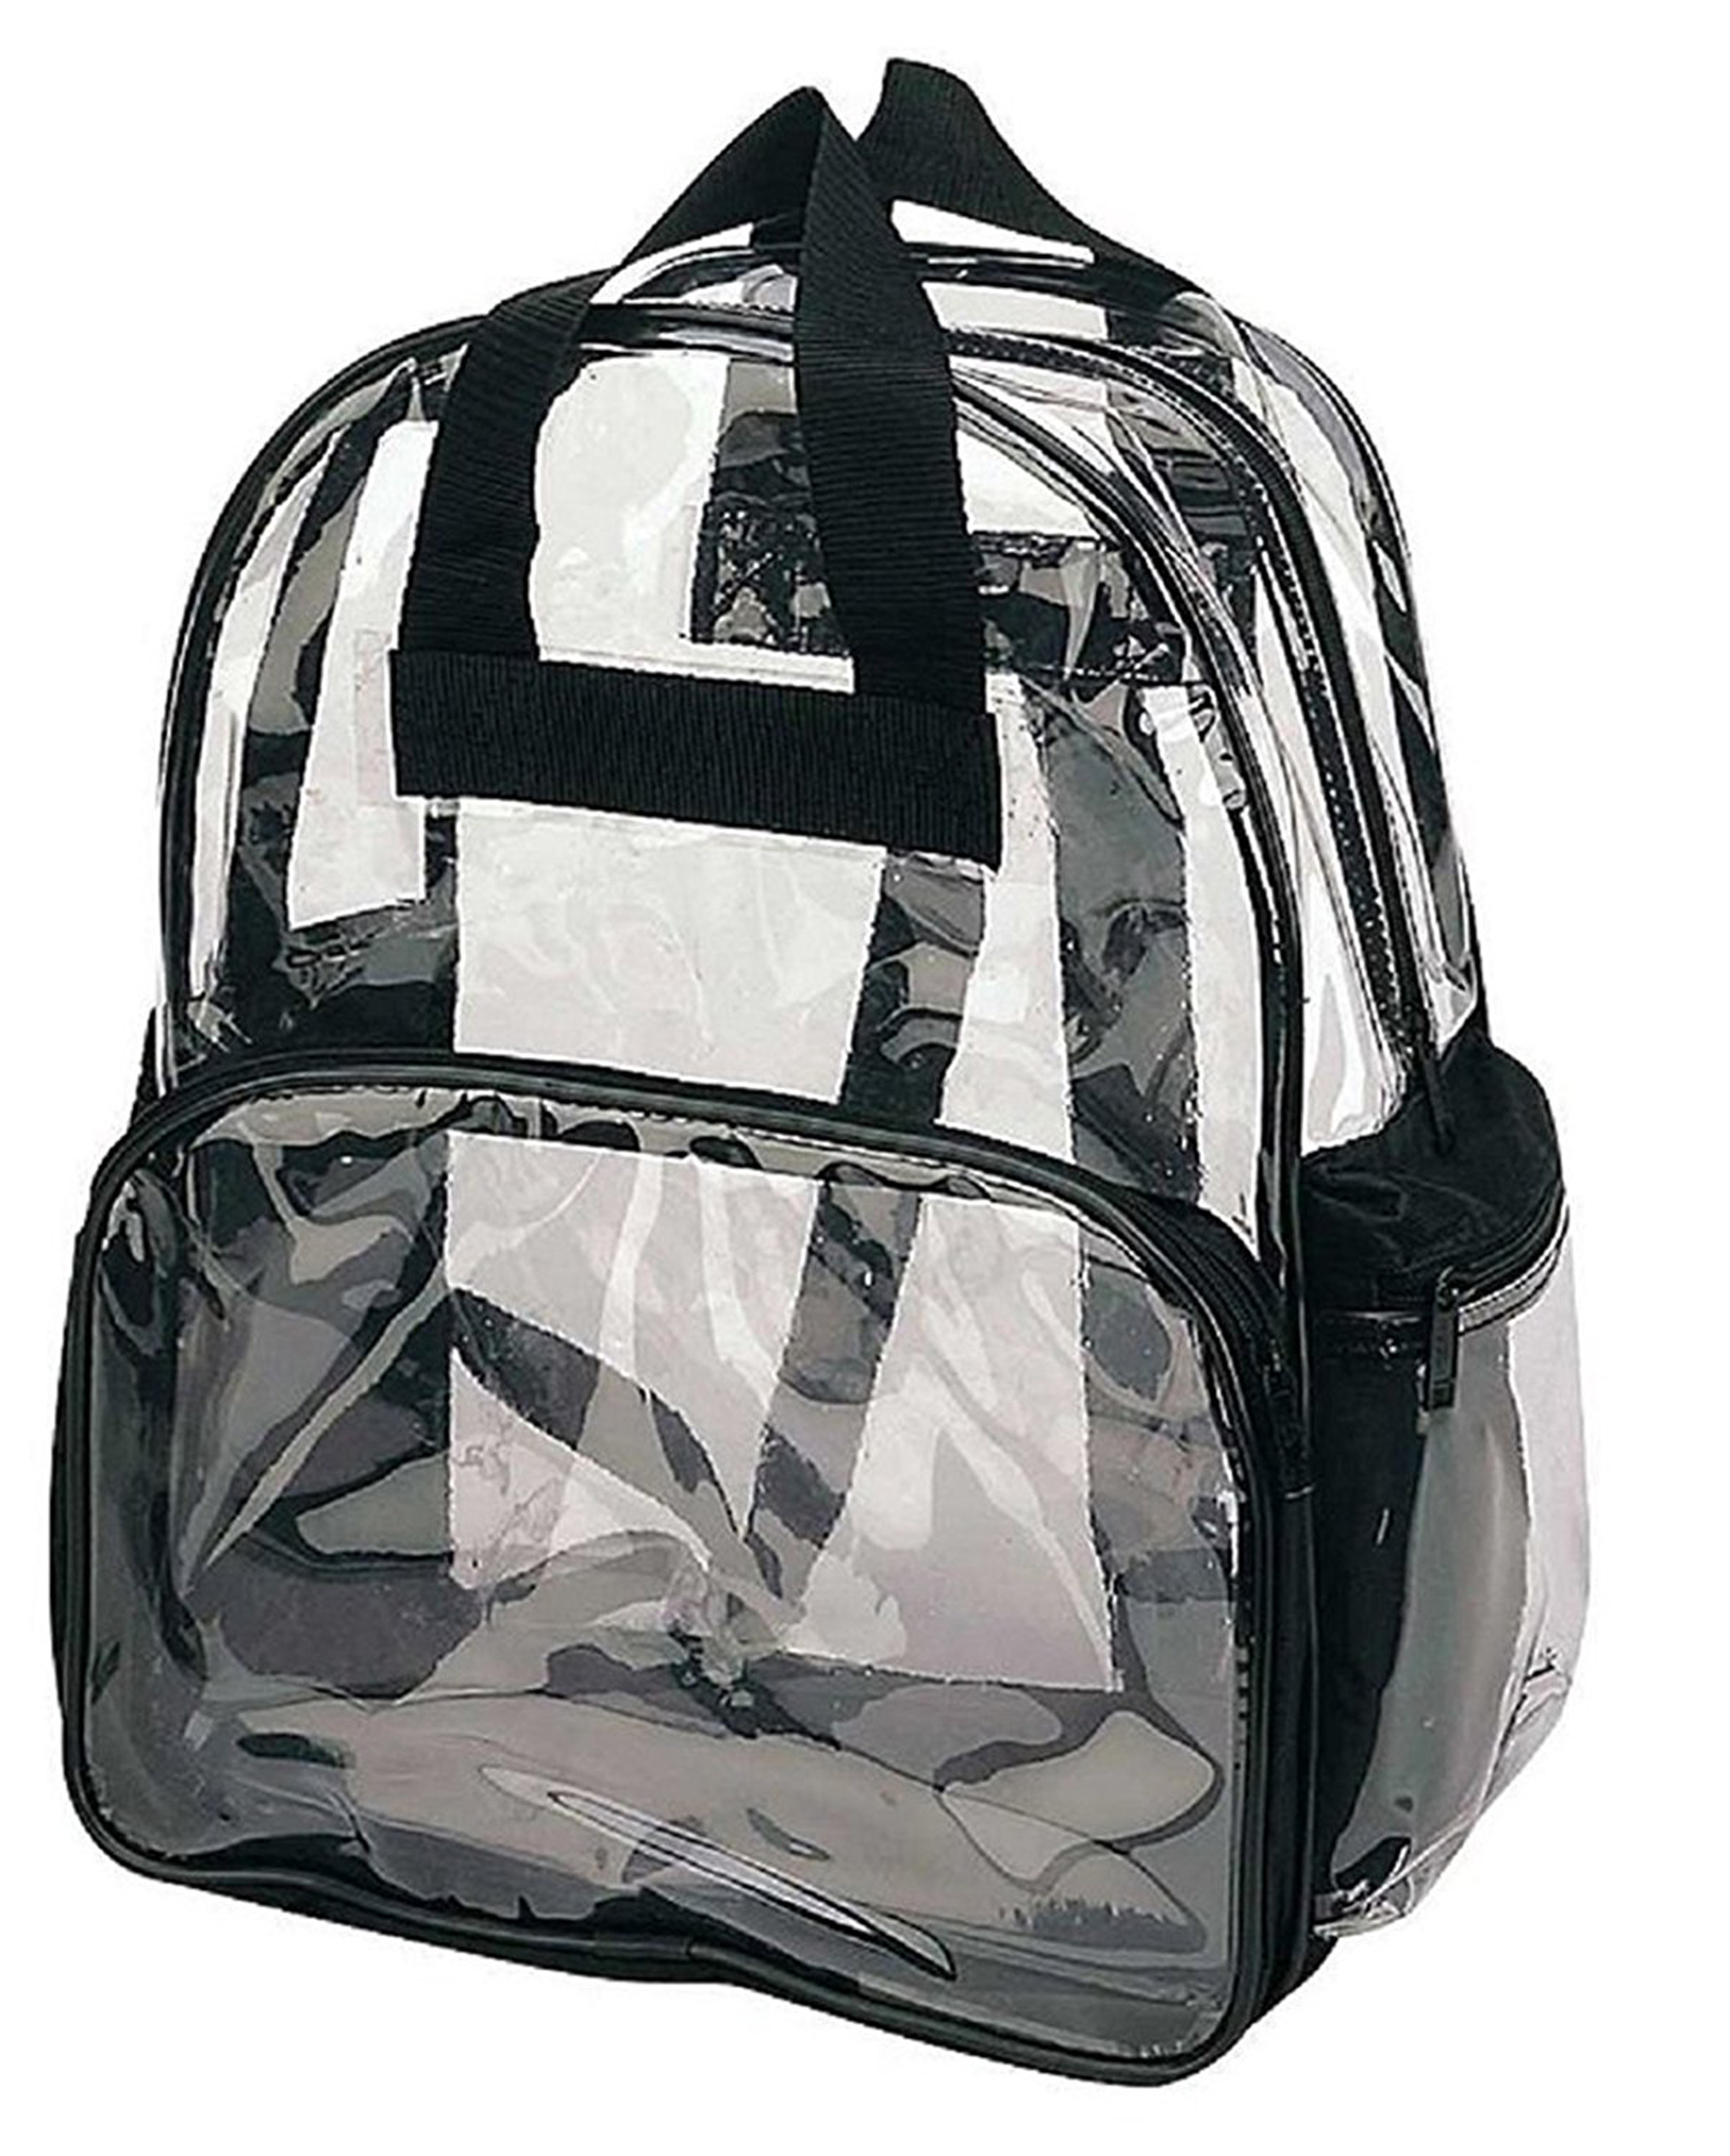 Clear Backpack, Camping Hiking Daypacks, NFL Sports Events Approved Backpack, Music Events Backpack, Custom Clear CBP Backpack Transparent Backpacks (Clear - 14") Black/Clear - image 1 of 4